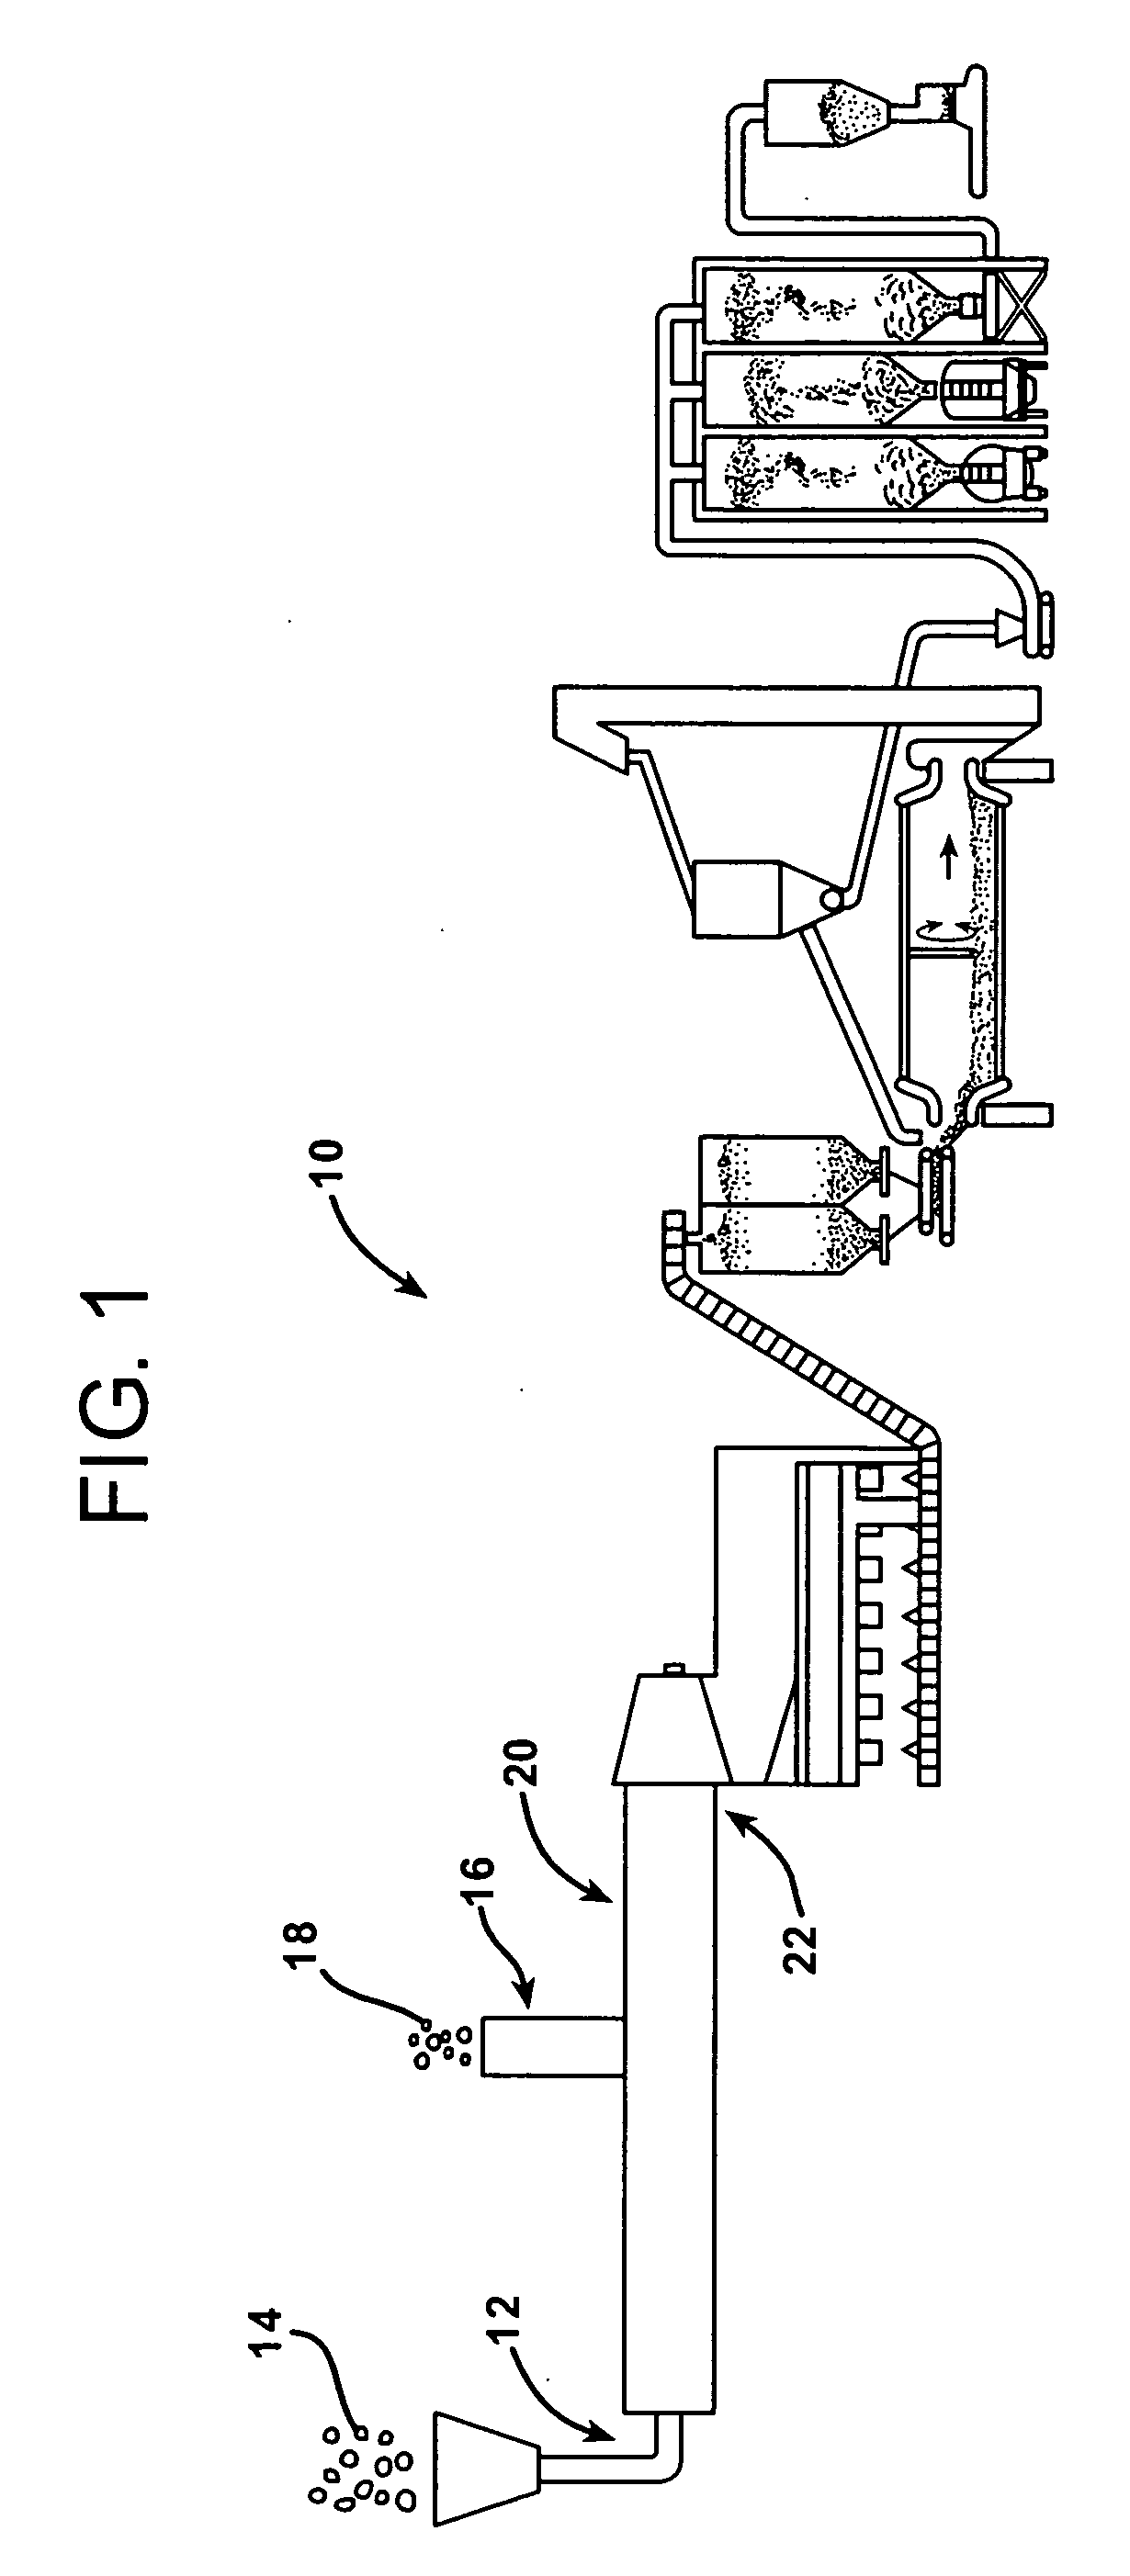 Method for recycling building materials